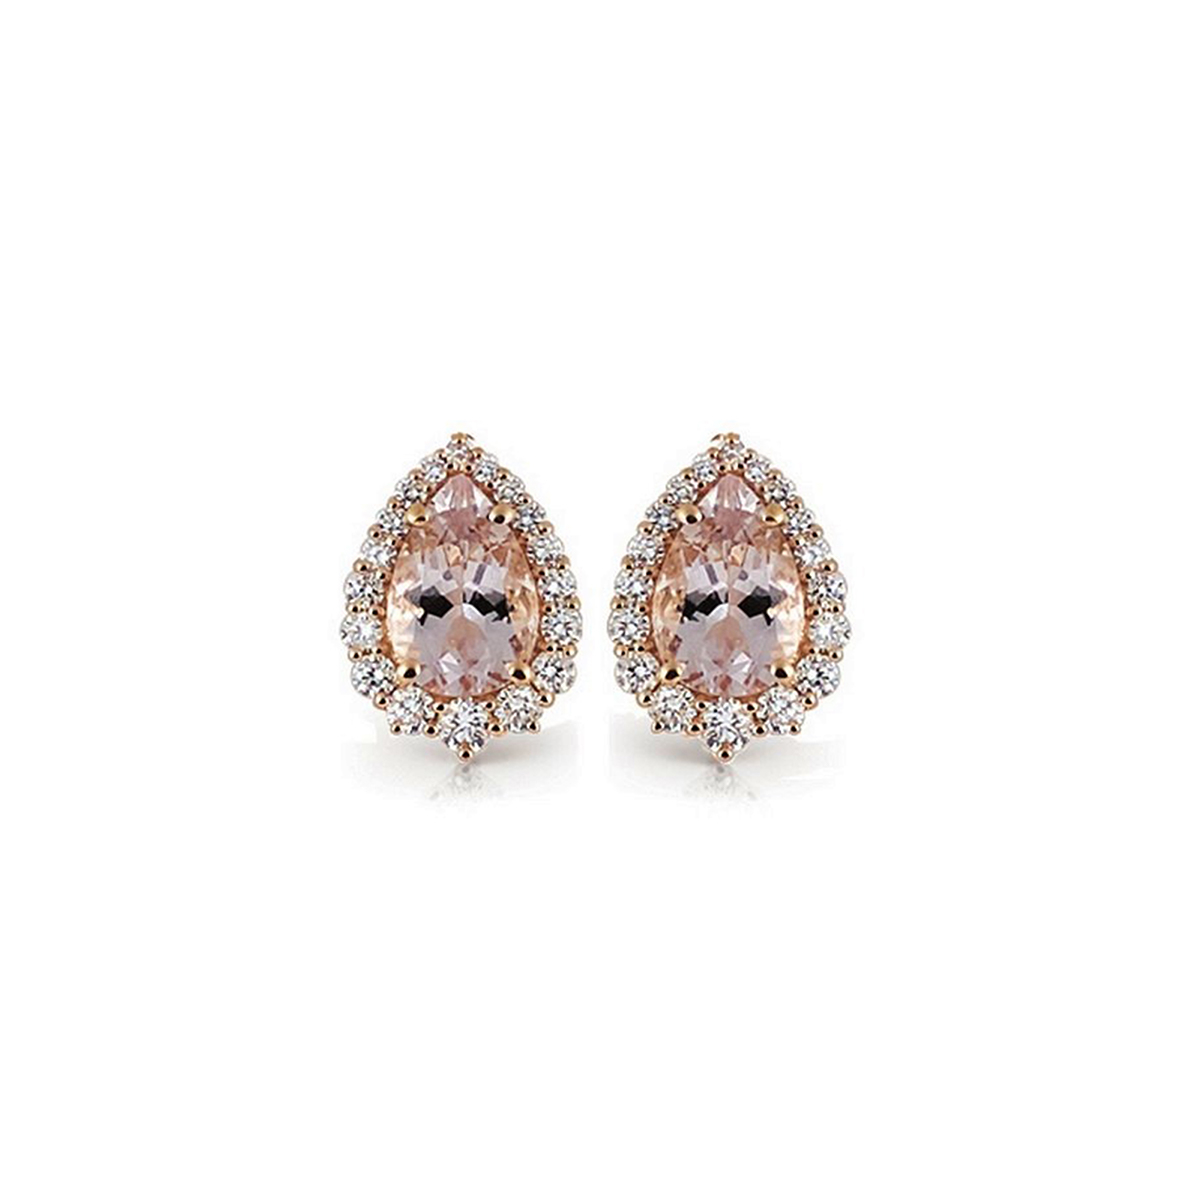 18 kt rose gold earrings with morganite and diamonds